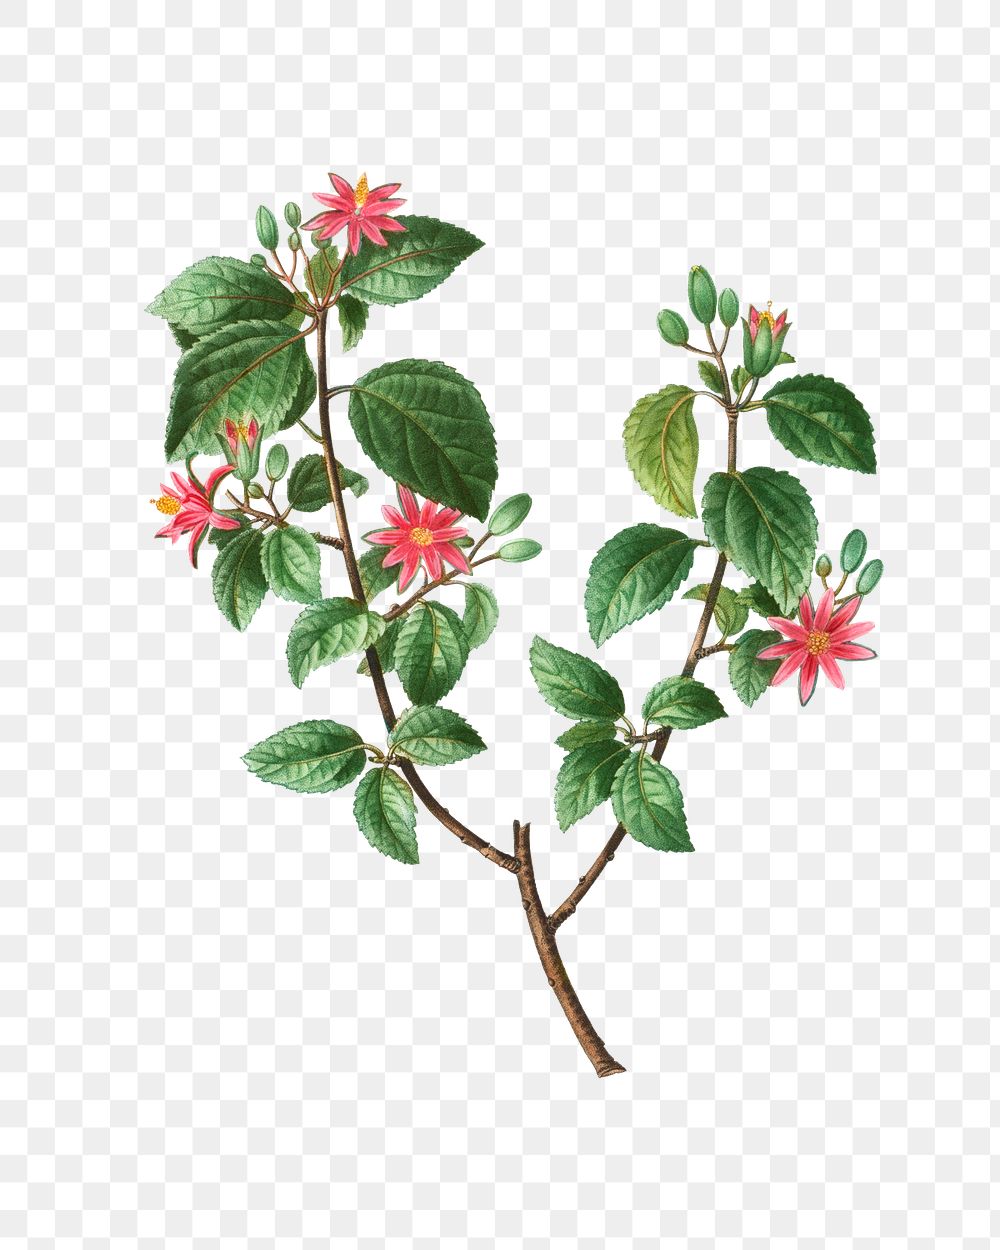 Crossberry tree plant transparent png